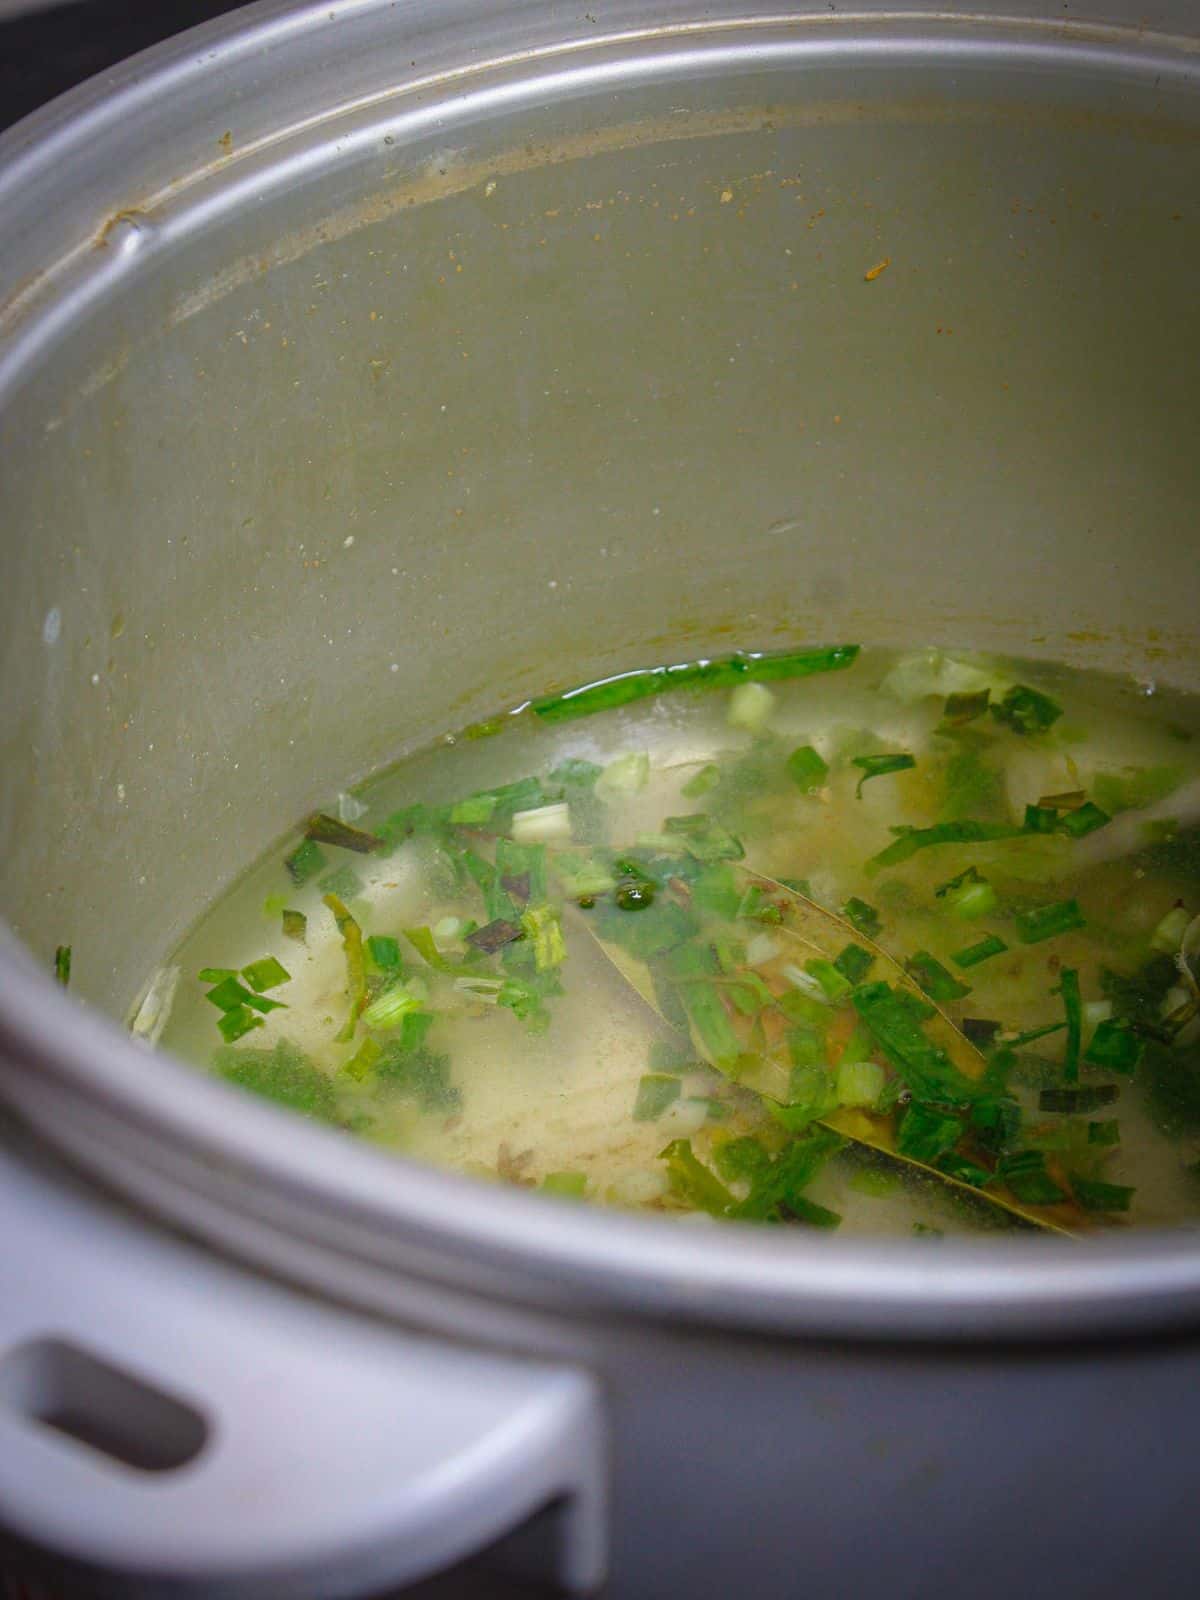 Add chicken broth to the pot and mix well